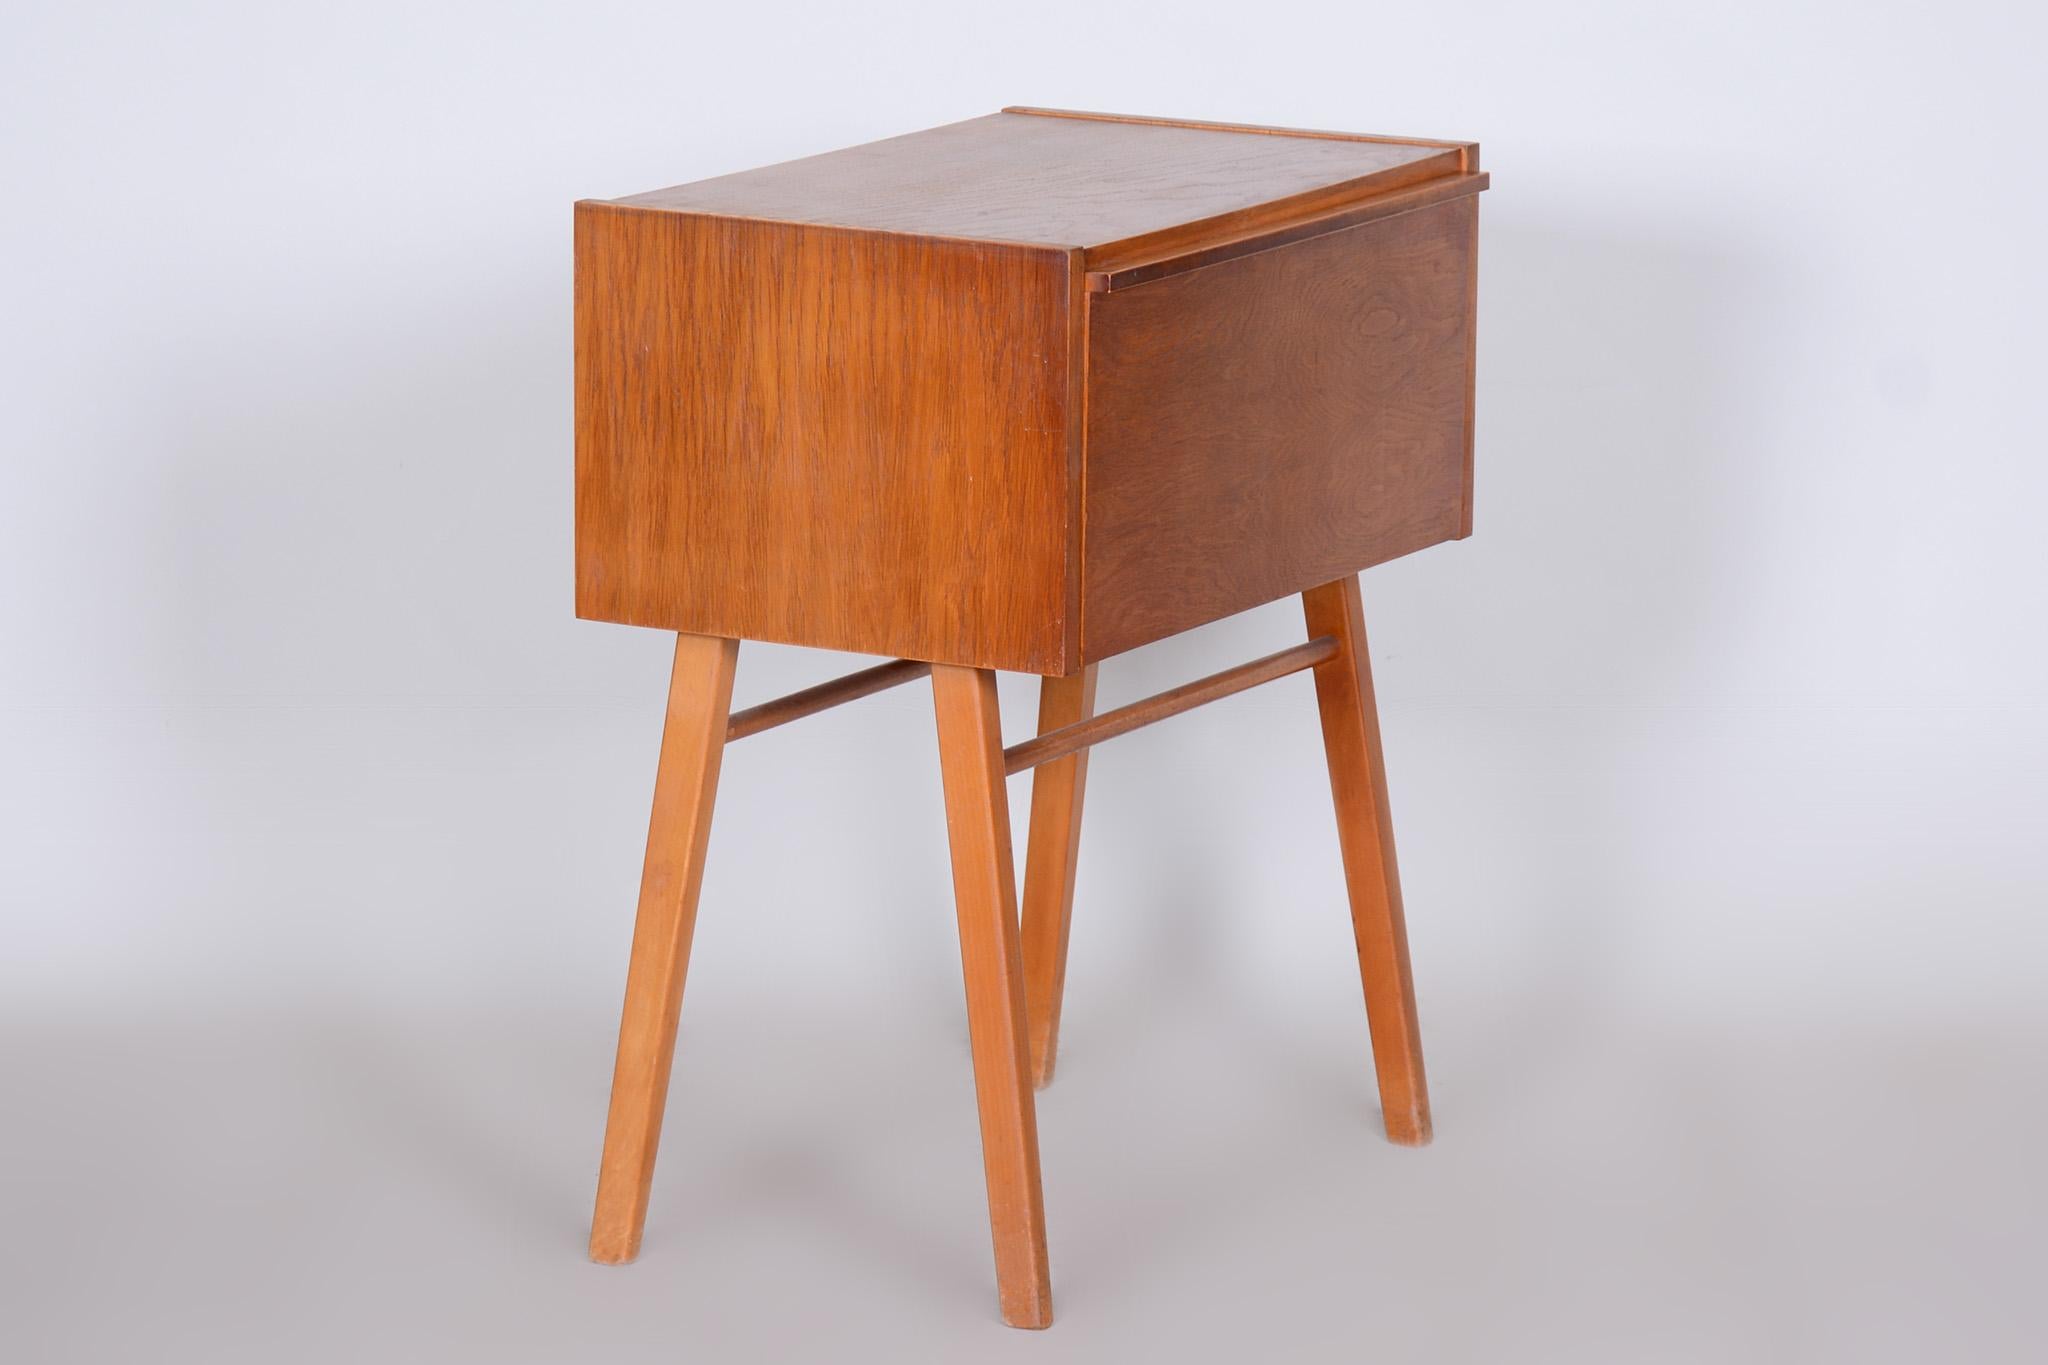 Czech Mid-Century Side Table, Cabinet Made Out of Oak, 1950s, Refreshed Polish For Sale 1